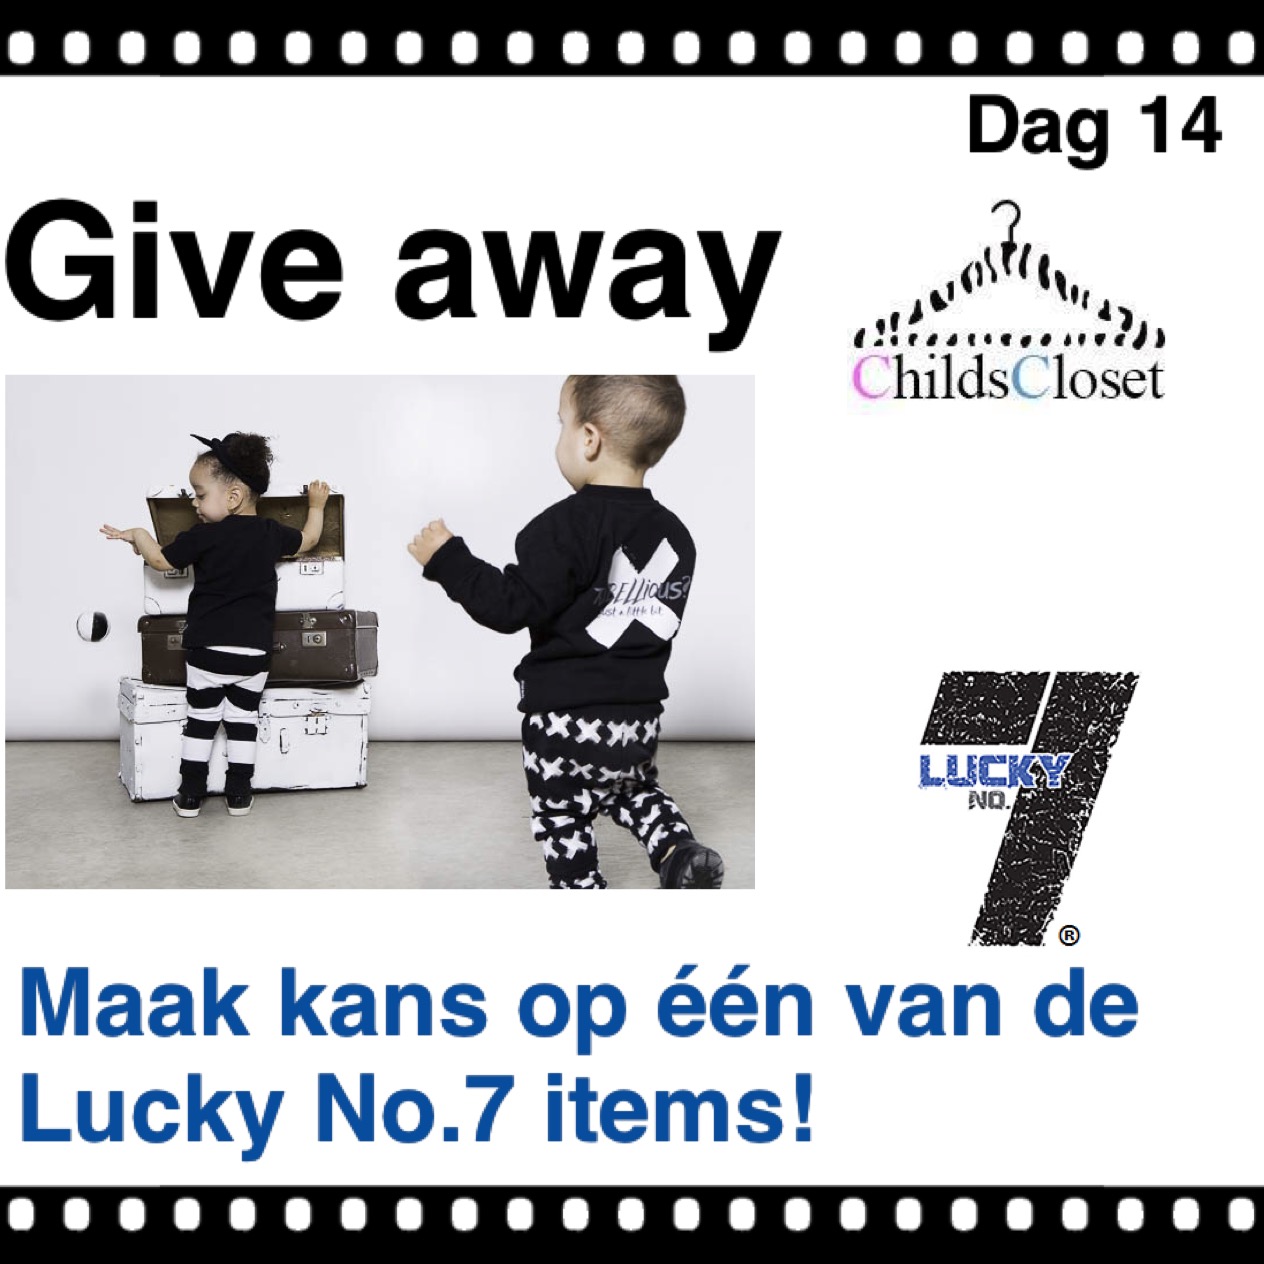 Give away dag 14: Win een Lucky No.7 outfit!